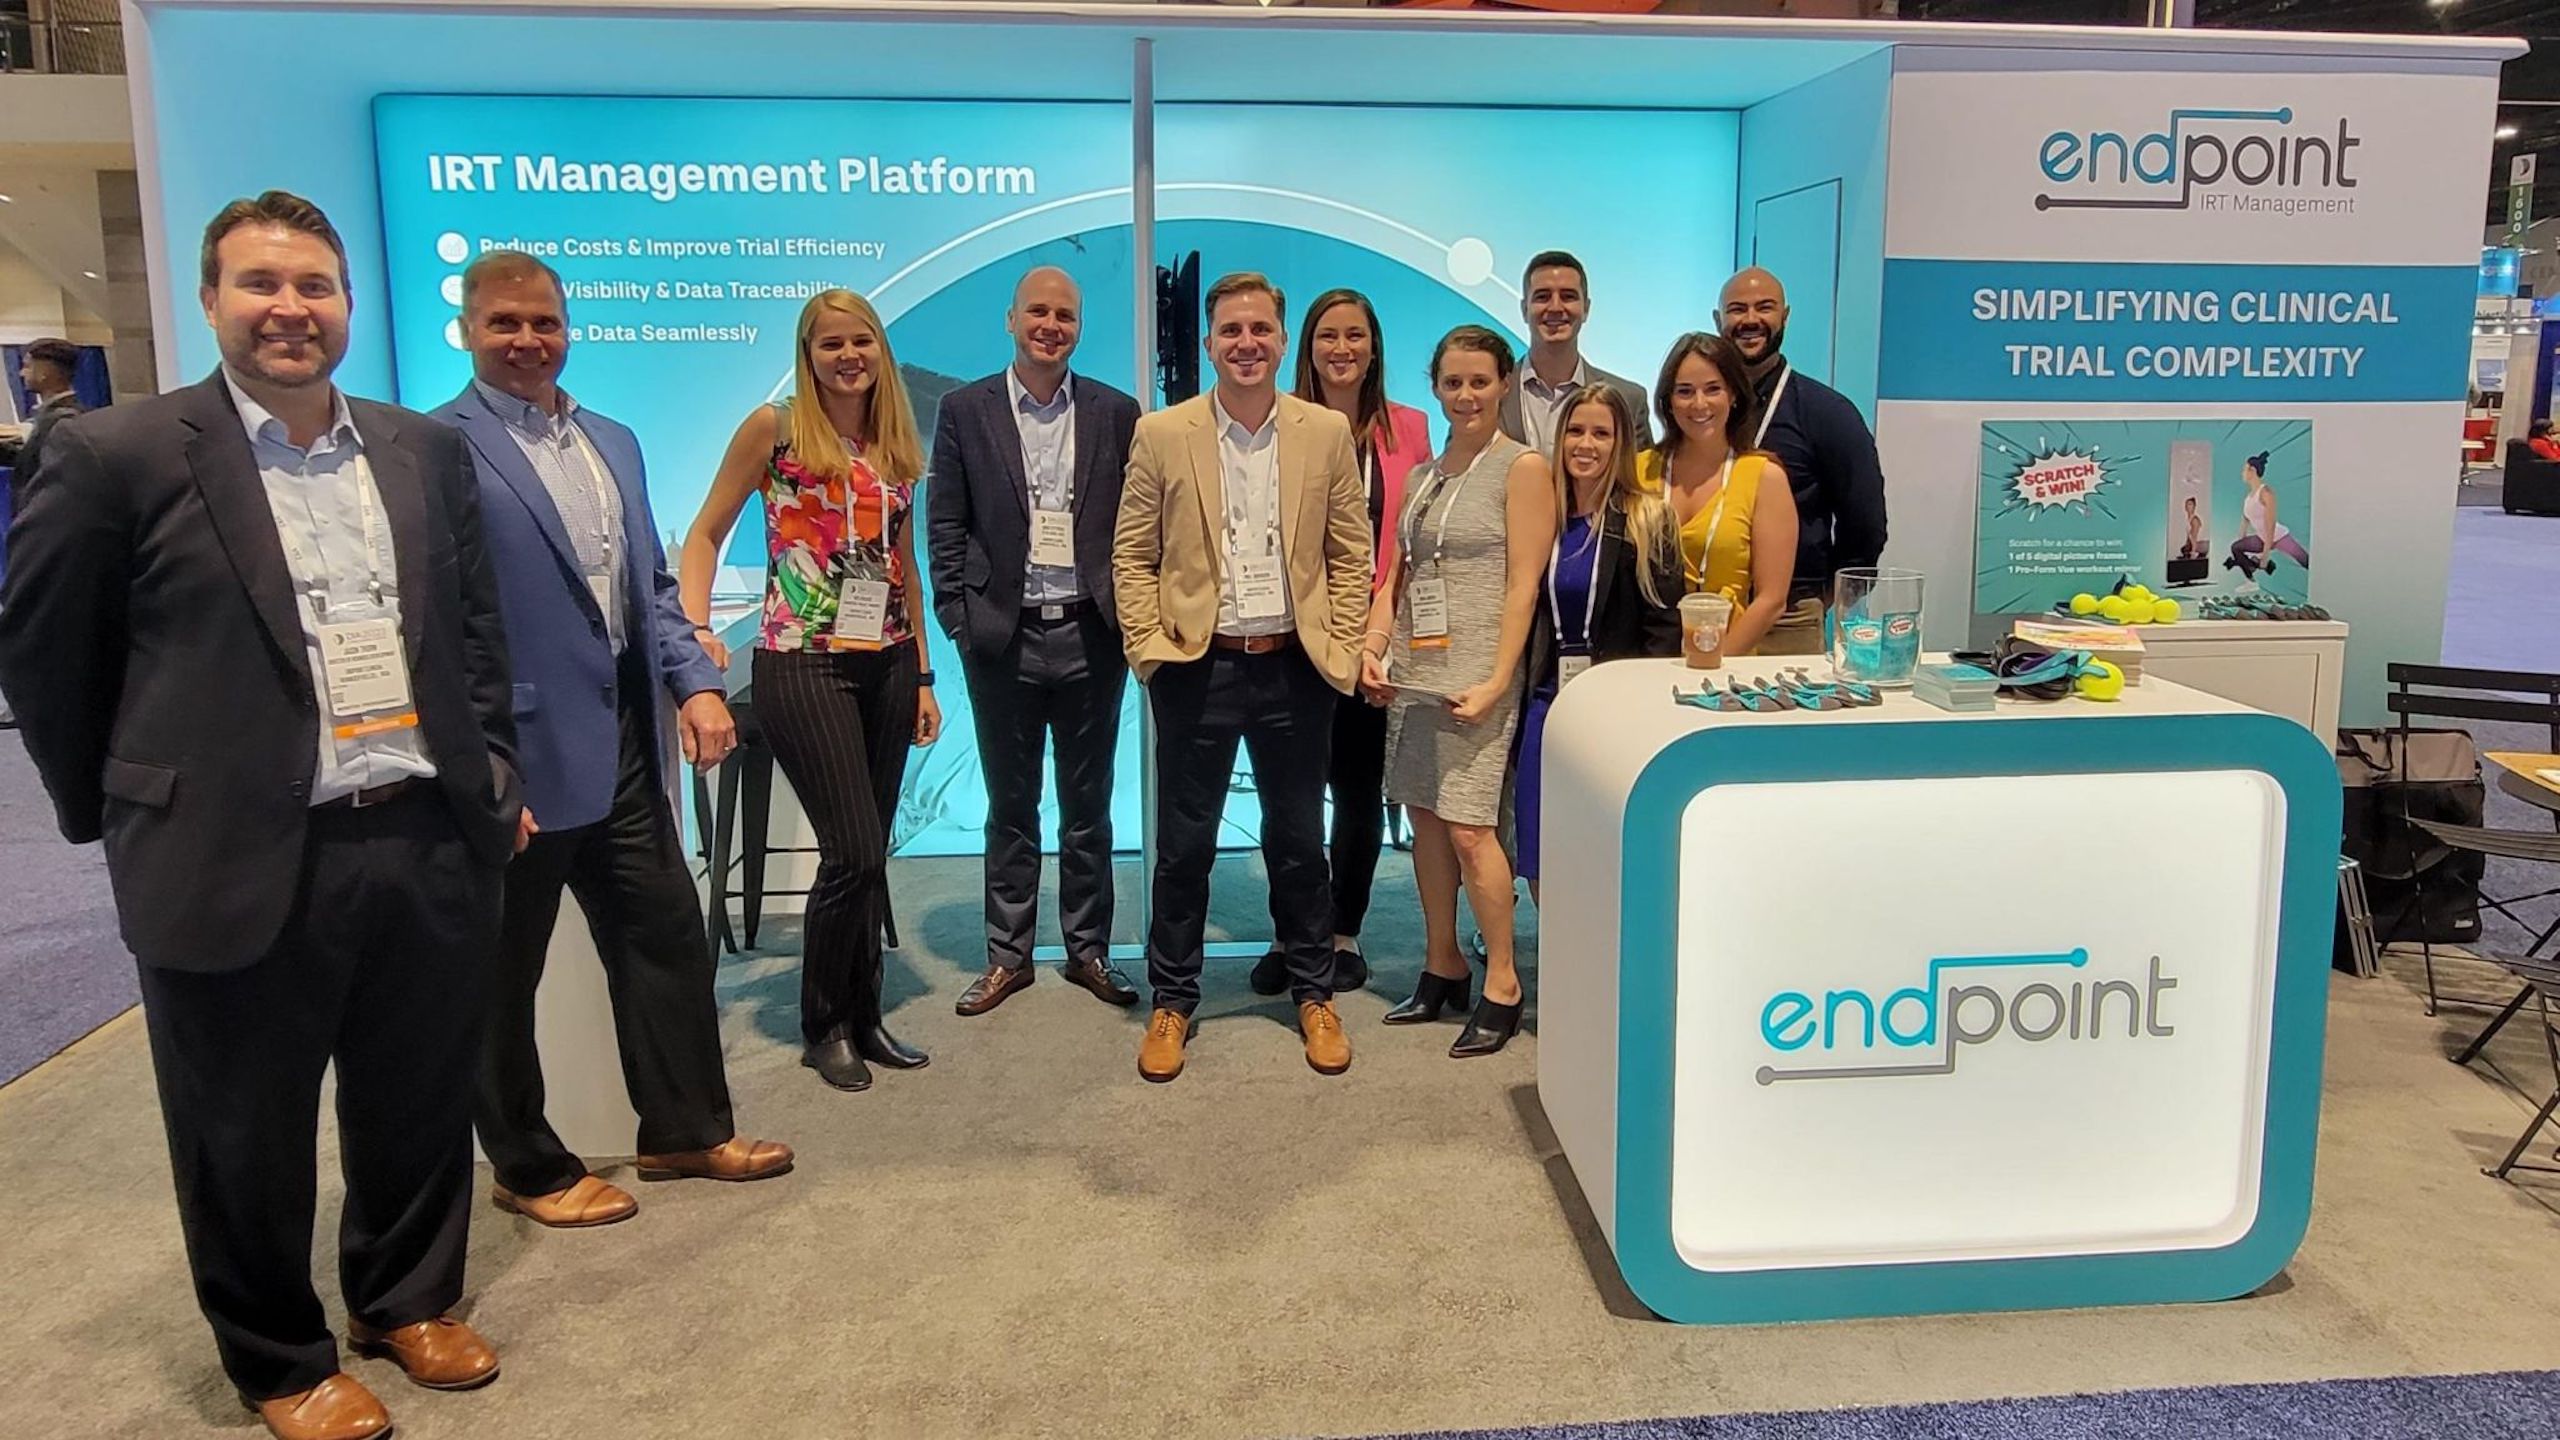 Endpoint Clinical team members at a conference. 